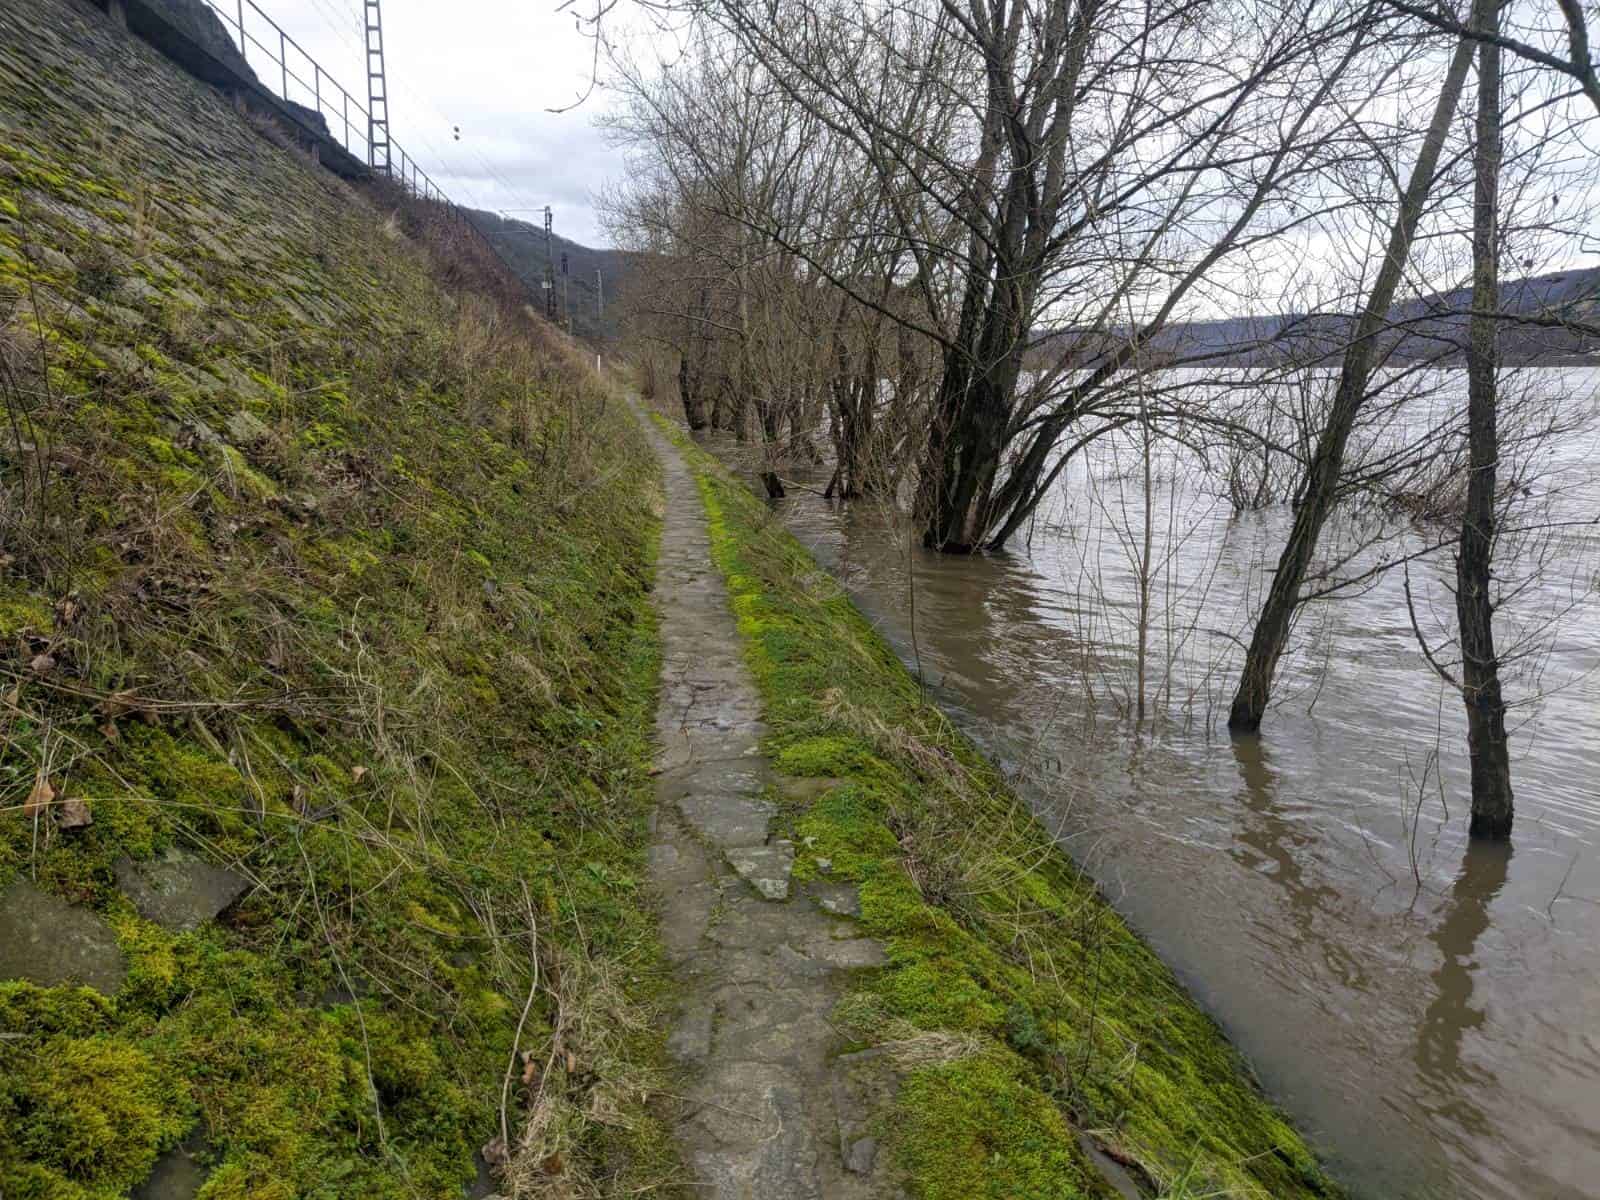 Sometimes my path followed mere inches from the Rhine